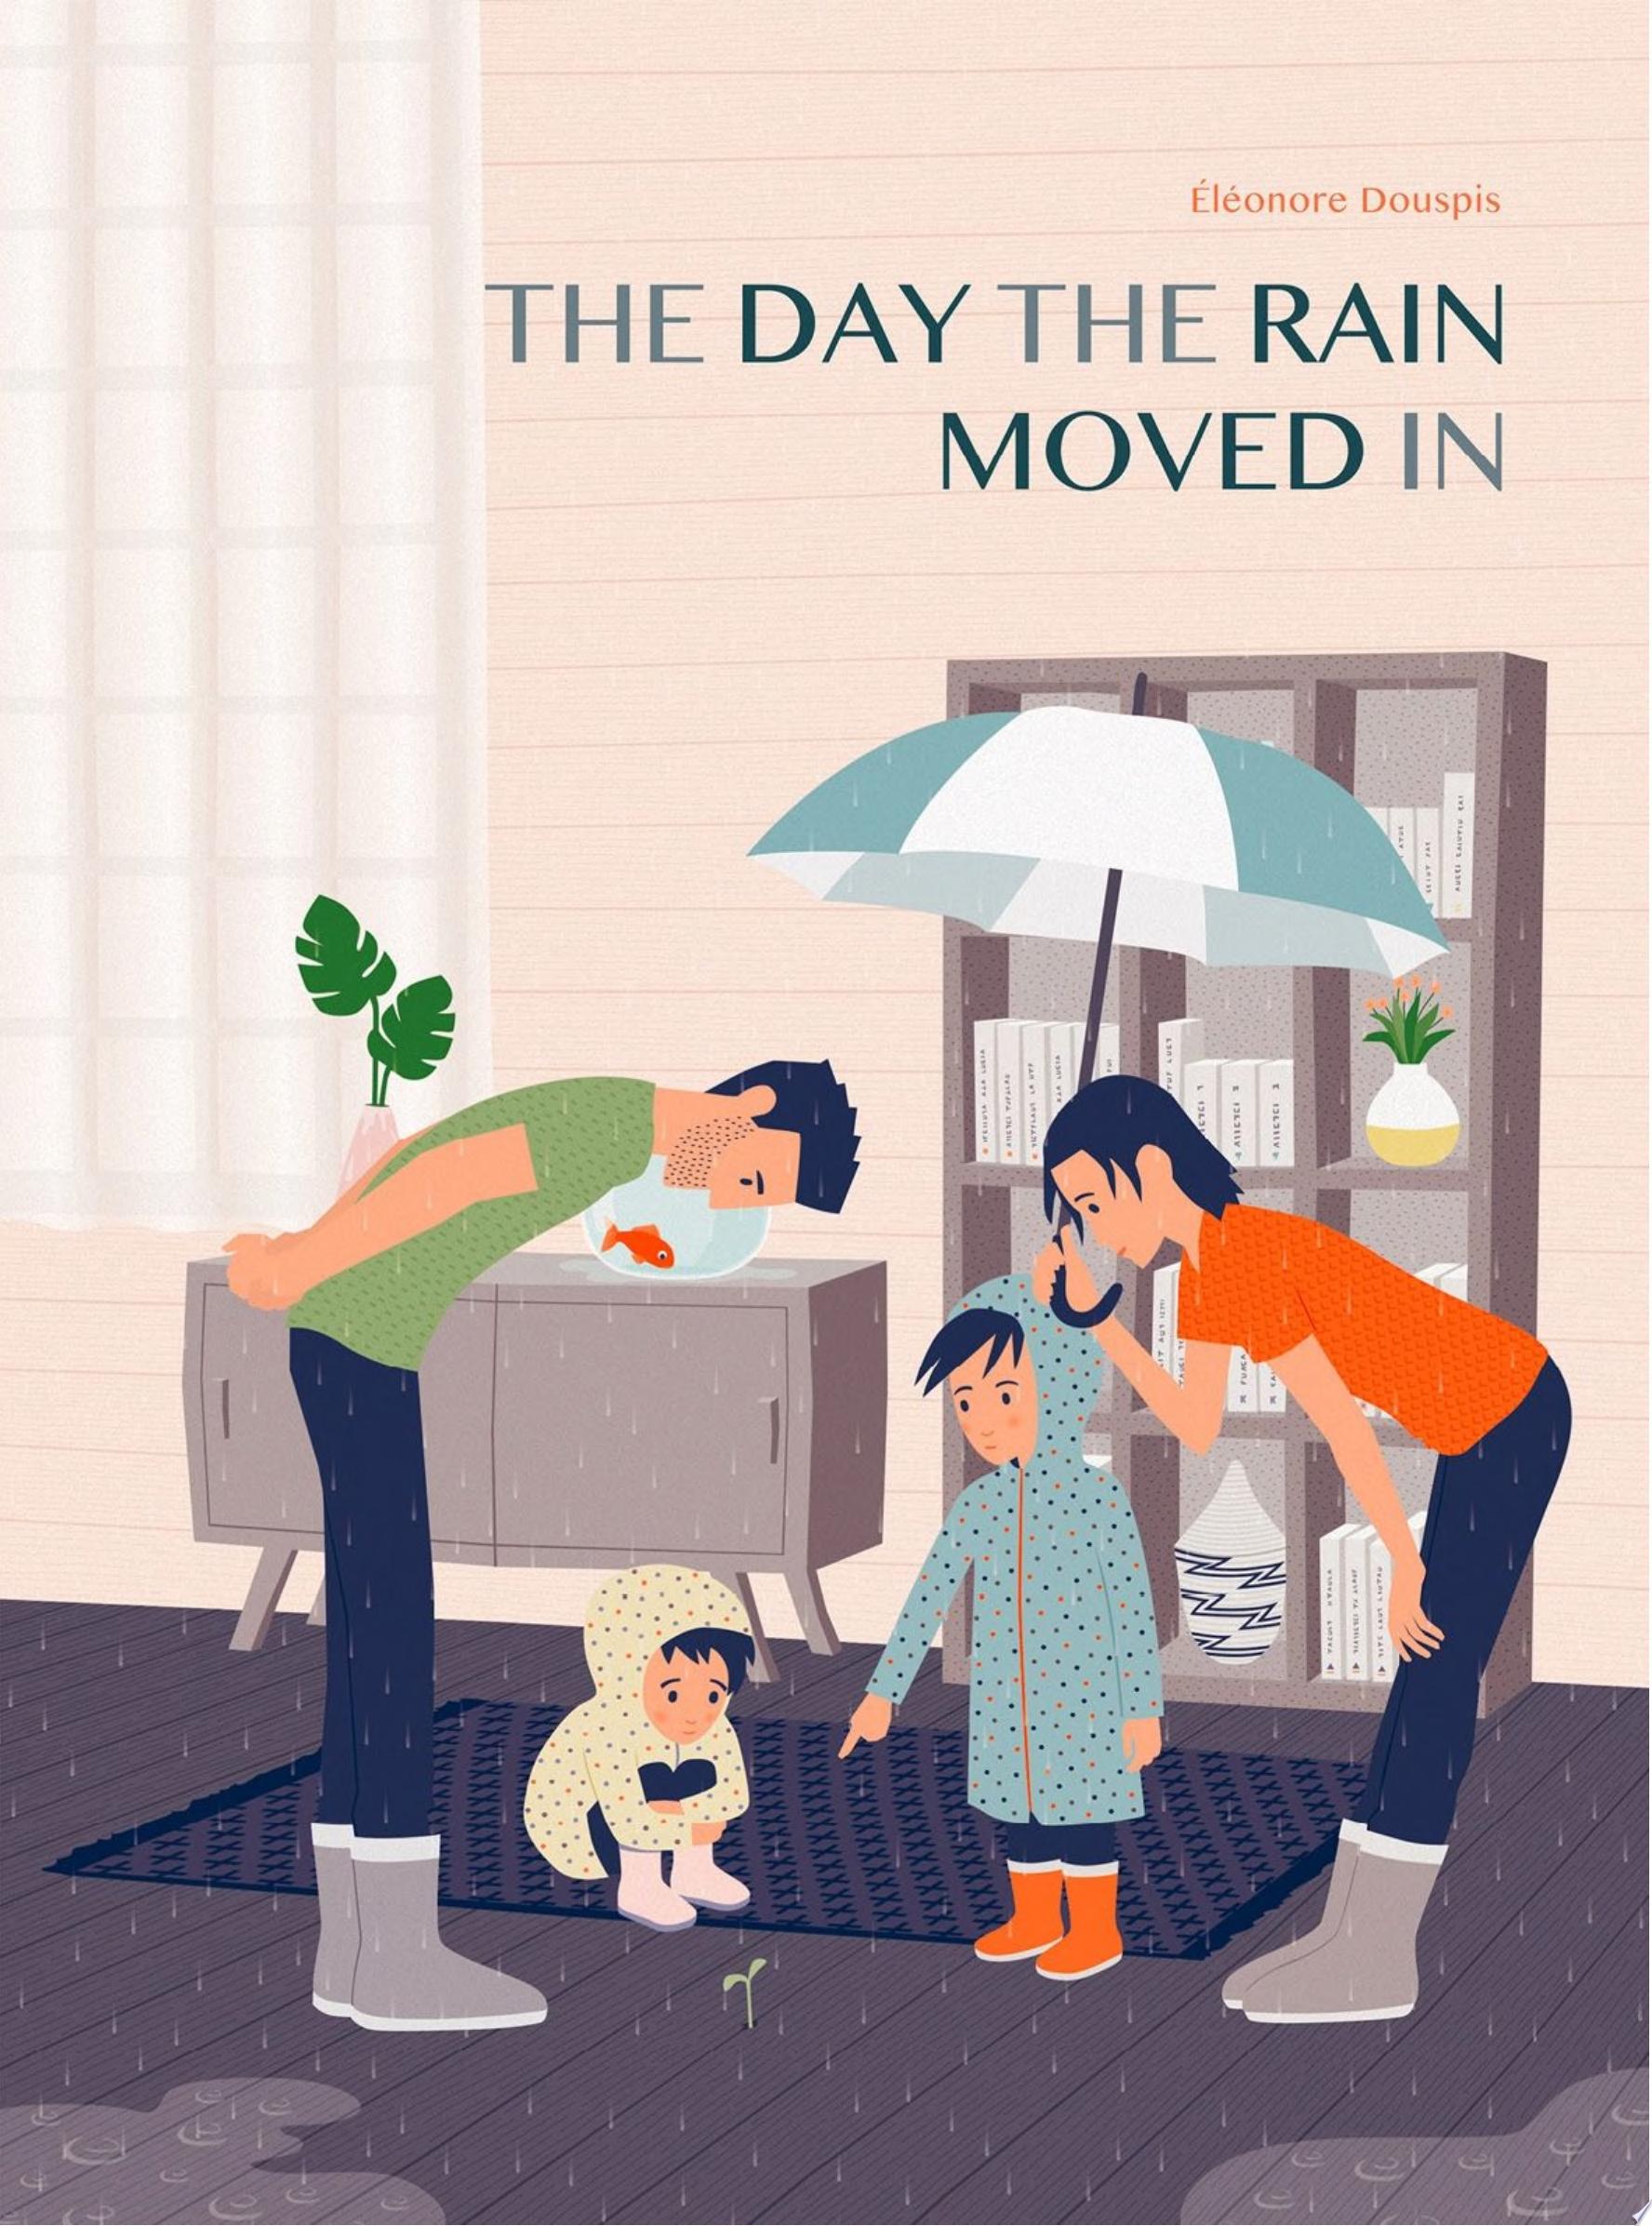 Image for "The Day the Rain Moved In"